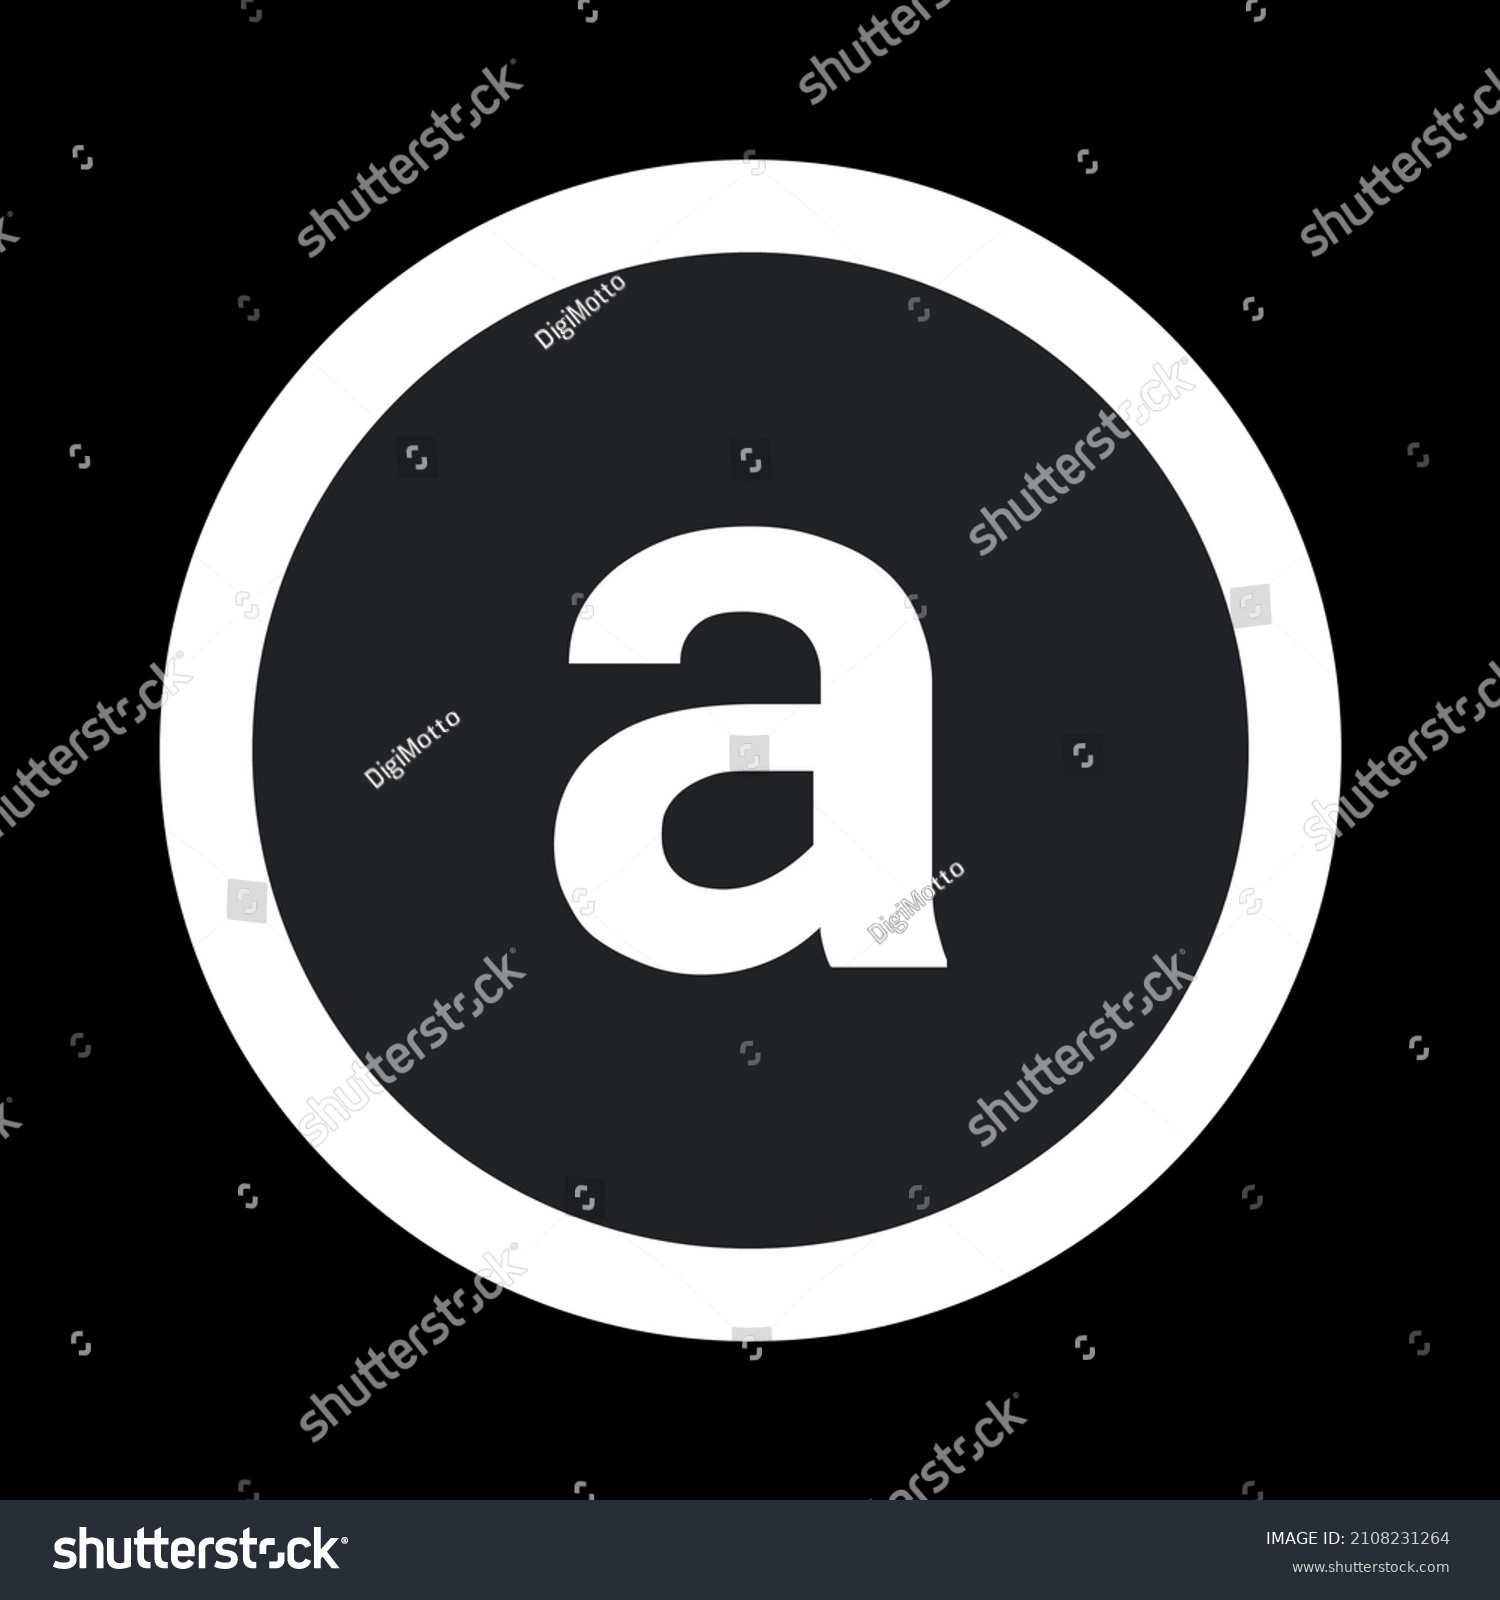 SVG of Arweave Icon AR coin cryptocurrency vector illustration. Best used for T-shirts, mugs, posters, banners, marketing, and trading website design. svg